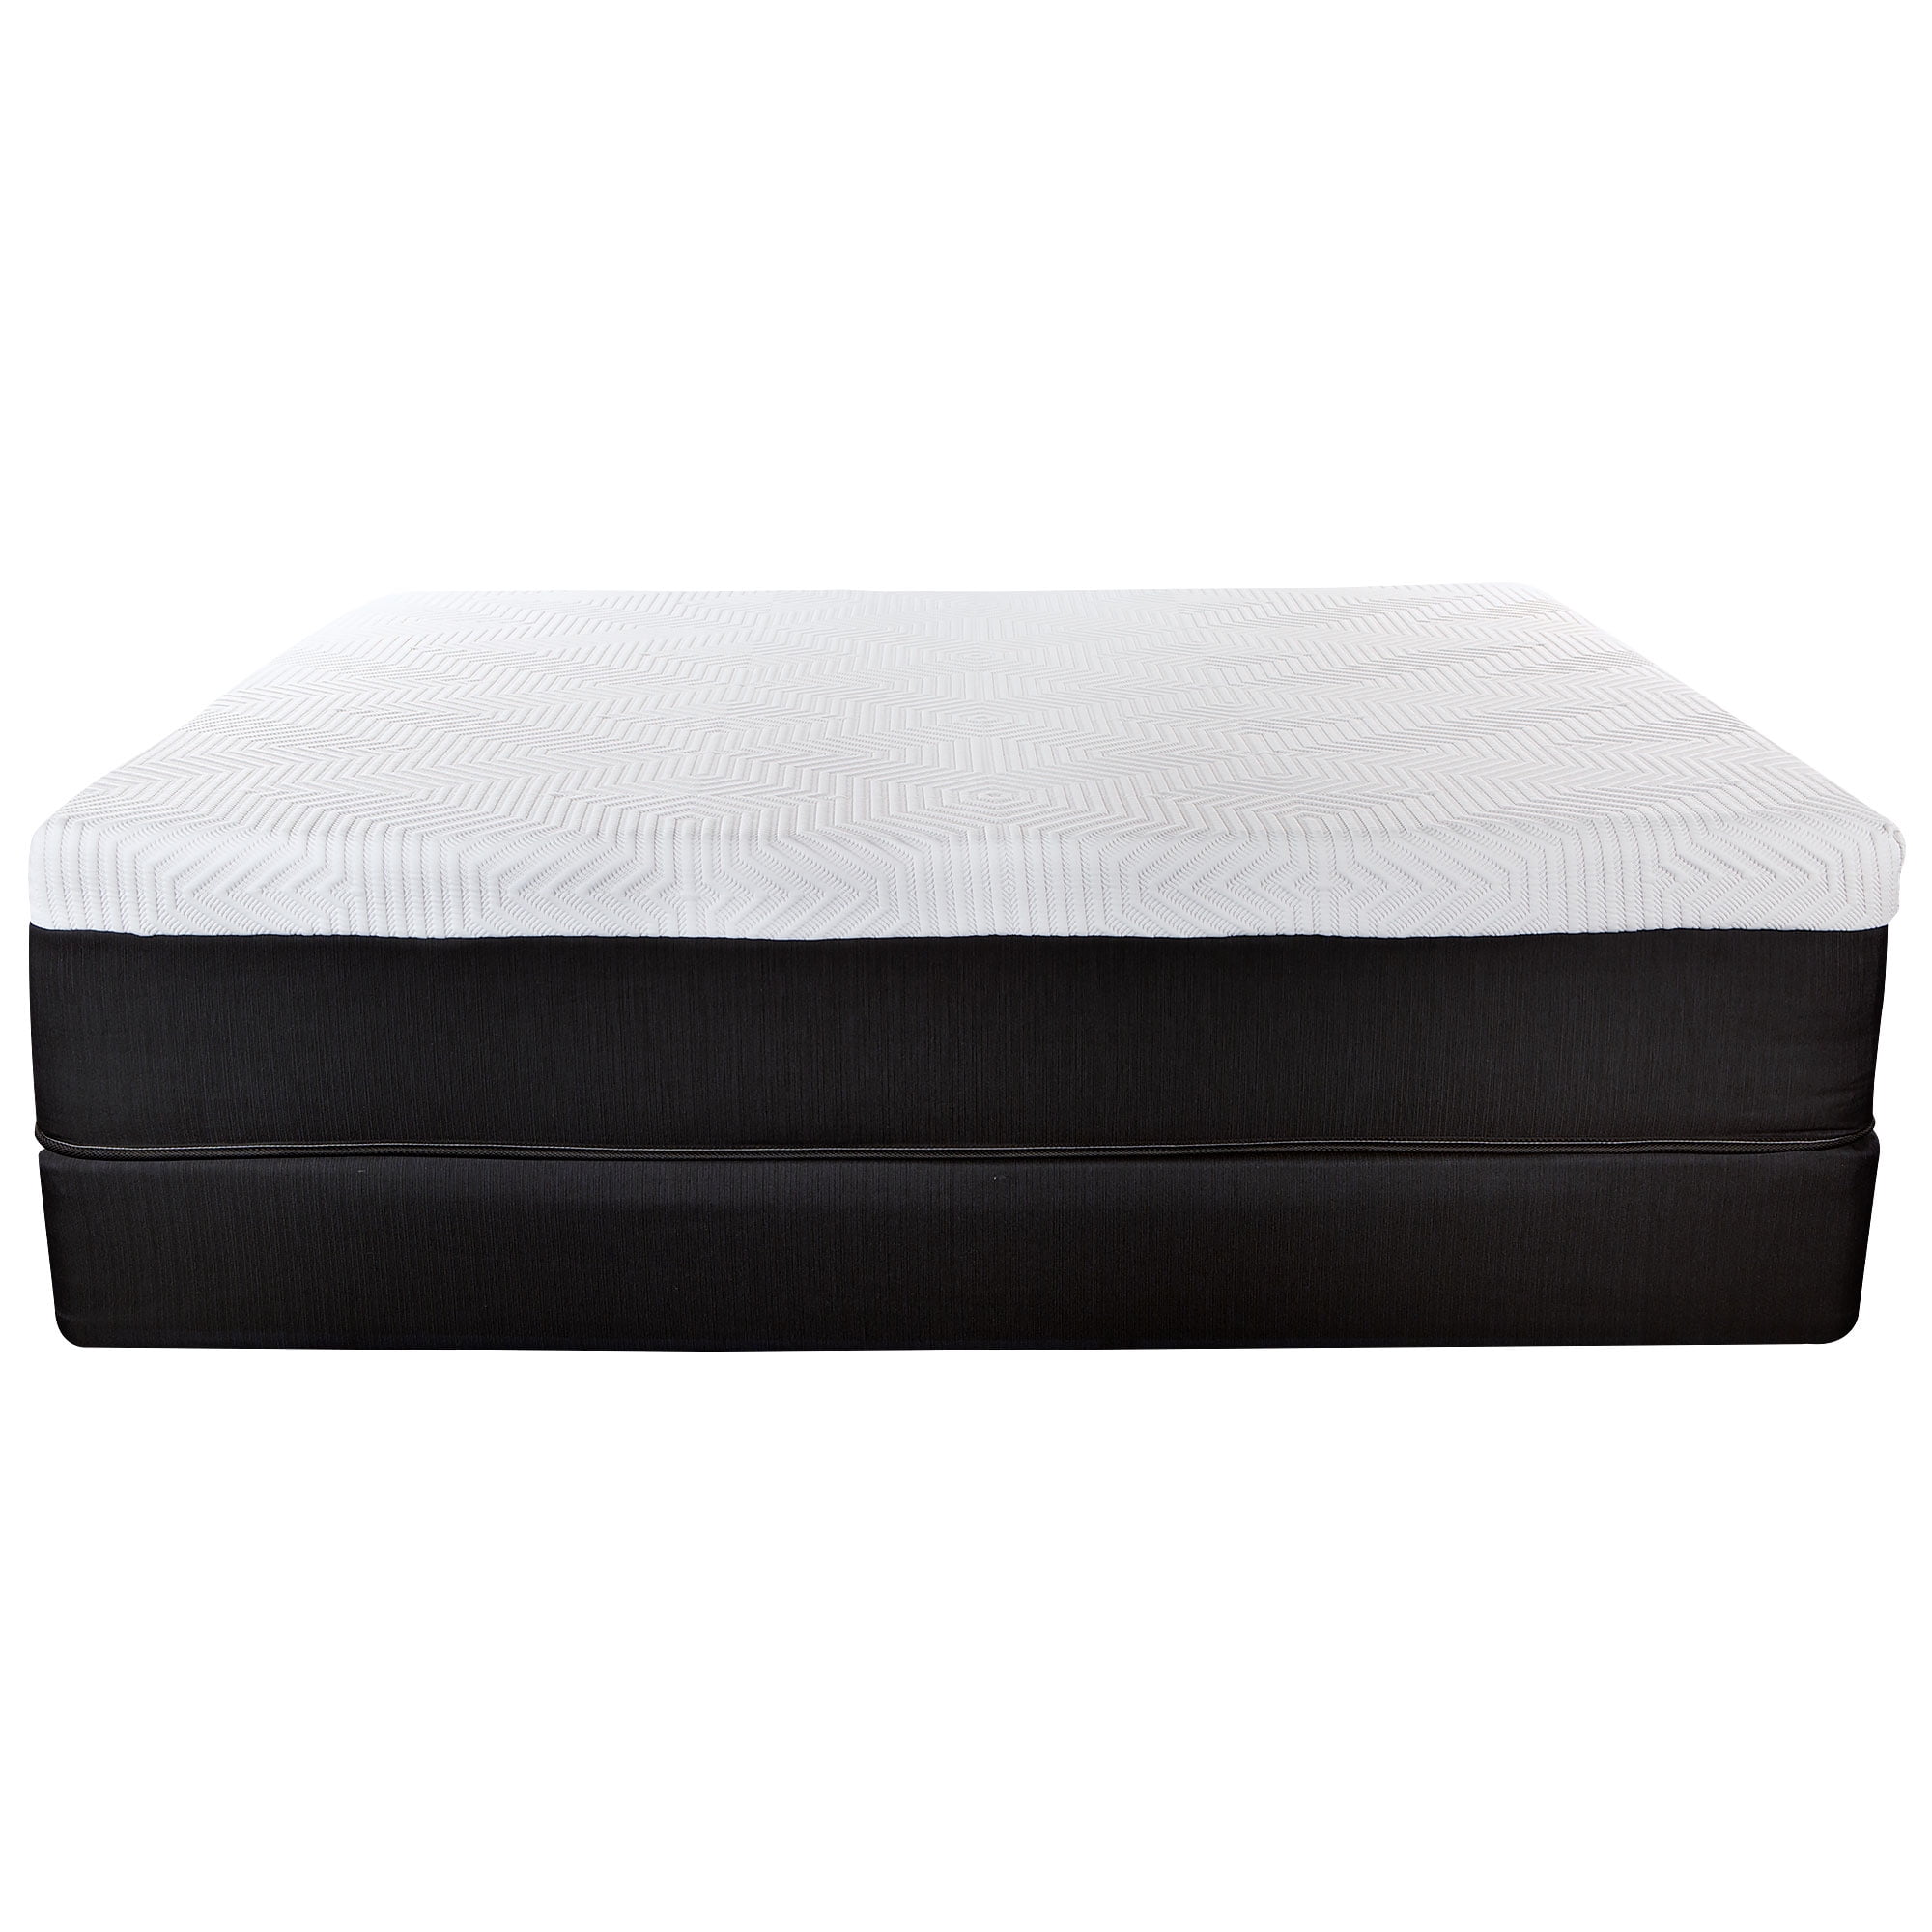 Sleep & Beyond 54 by 76-inch Washable Wool Mattress Topper Full Natural WFMT for sale online 